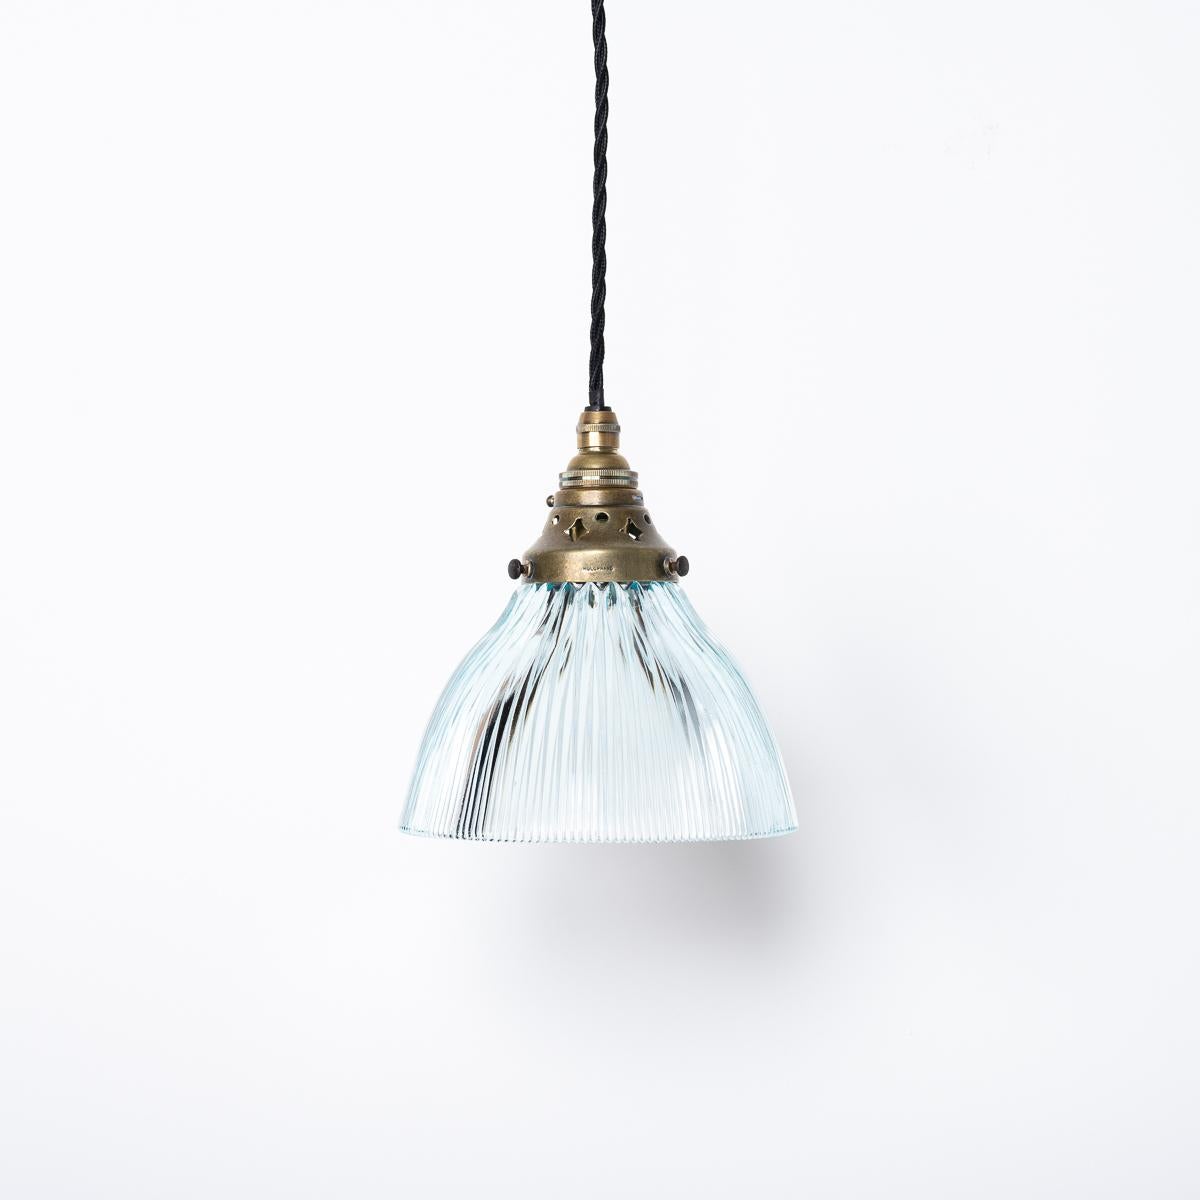 ANTIQUE HOLOPHANE BLUE PRISMATIC GLASS PENDANT LIGHT


An attractive antique Holophane prismatic glass light with original adjustable aged brass fittings.

Stamped Holophane galleries and rare blue prismatic glass shades also bearing the Holophane